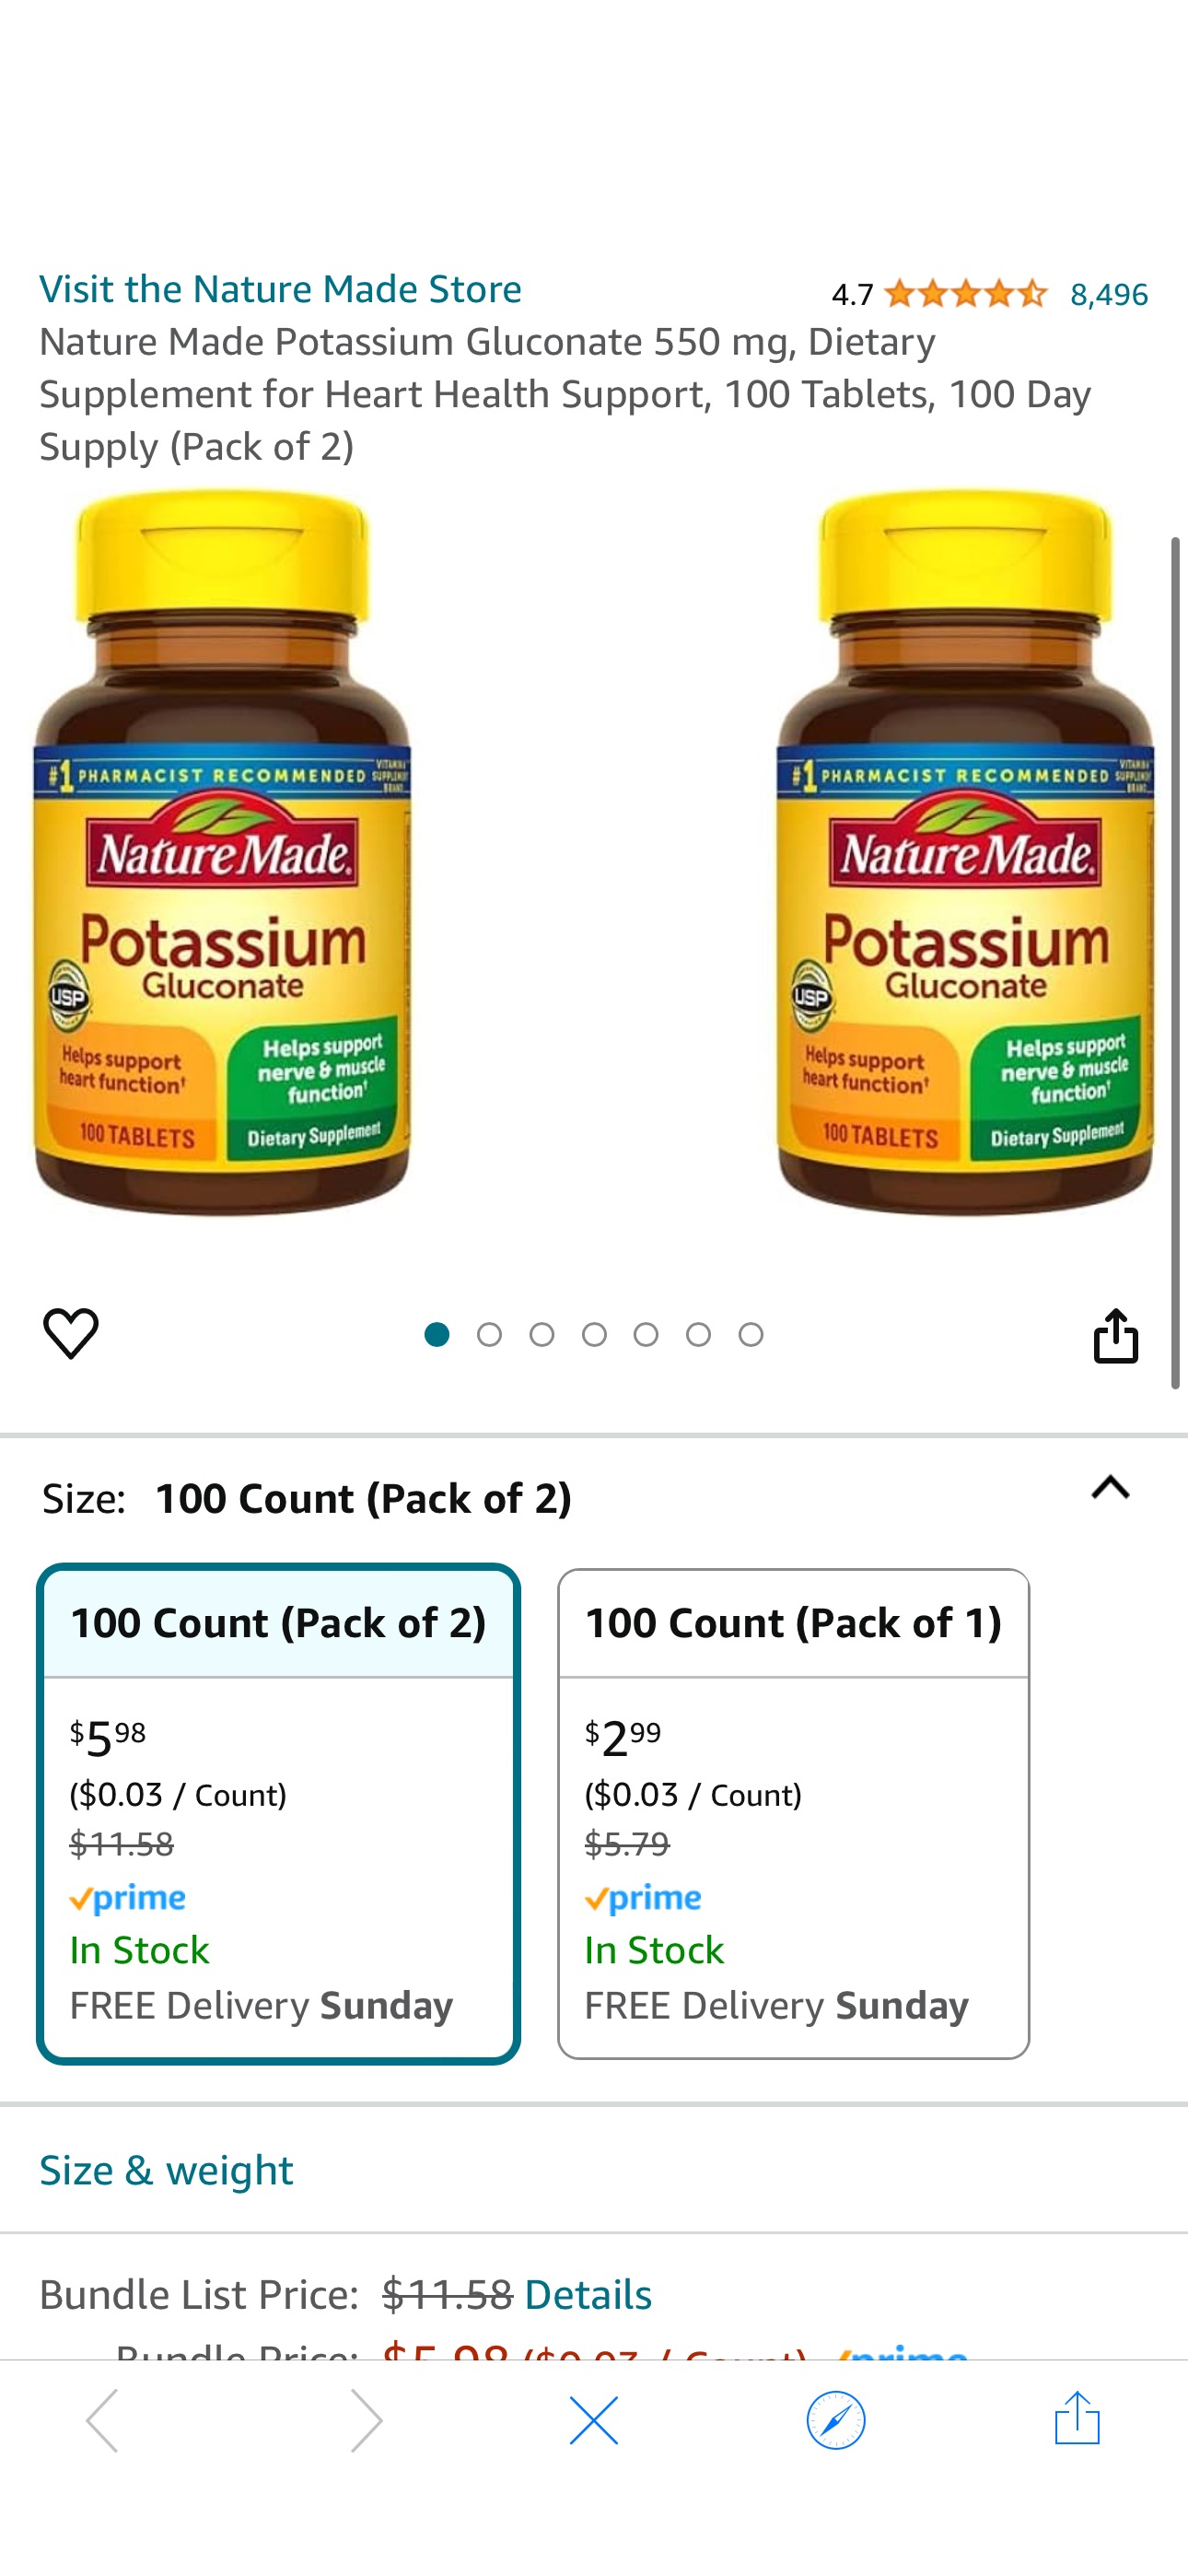 Amazon.com: Nature Made Potassium Gluconate 550 mg, Dietary Supplement for Heart Health Support, 100 Tablets, 100 Day Supply (Pack of 2) : Health & Household